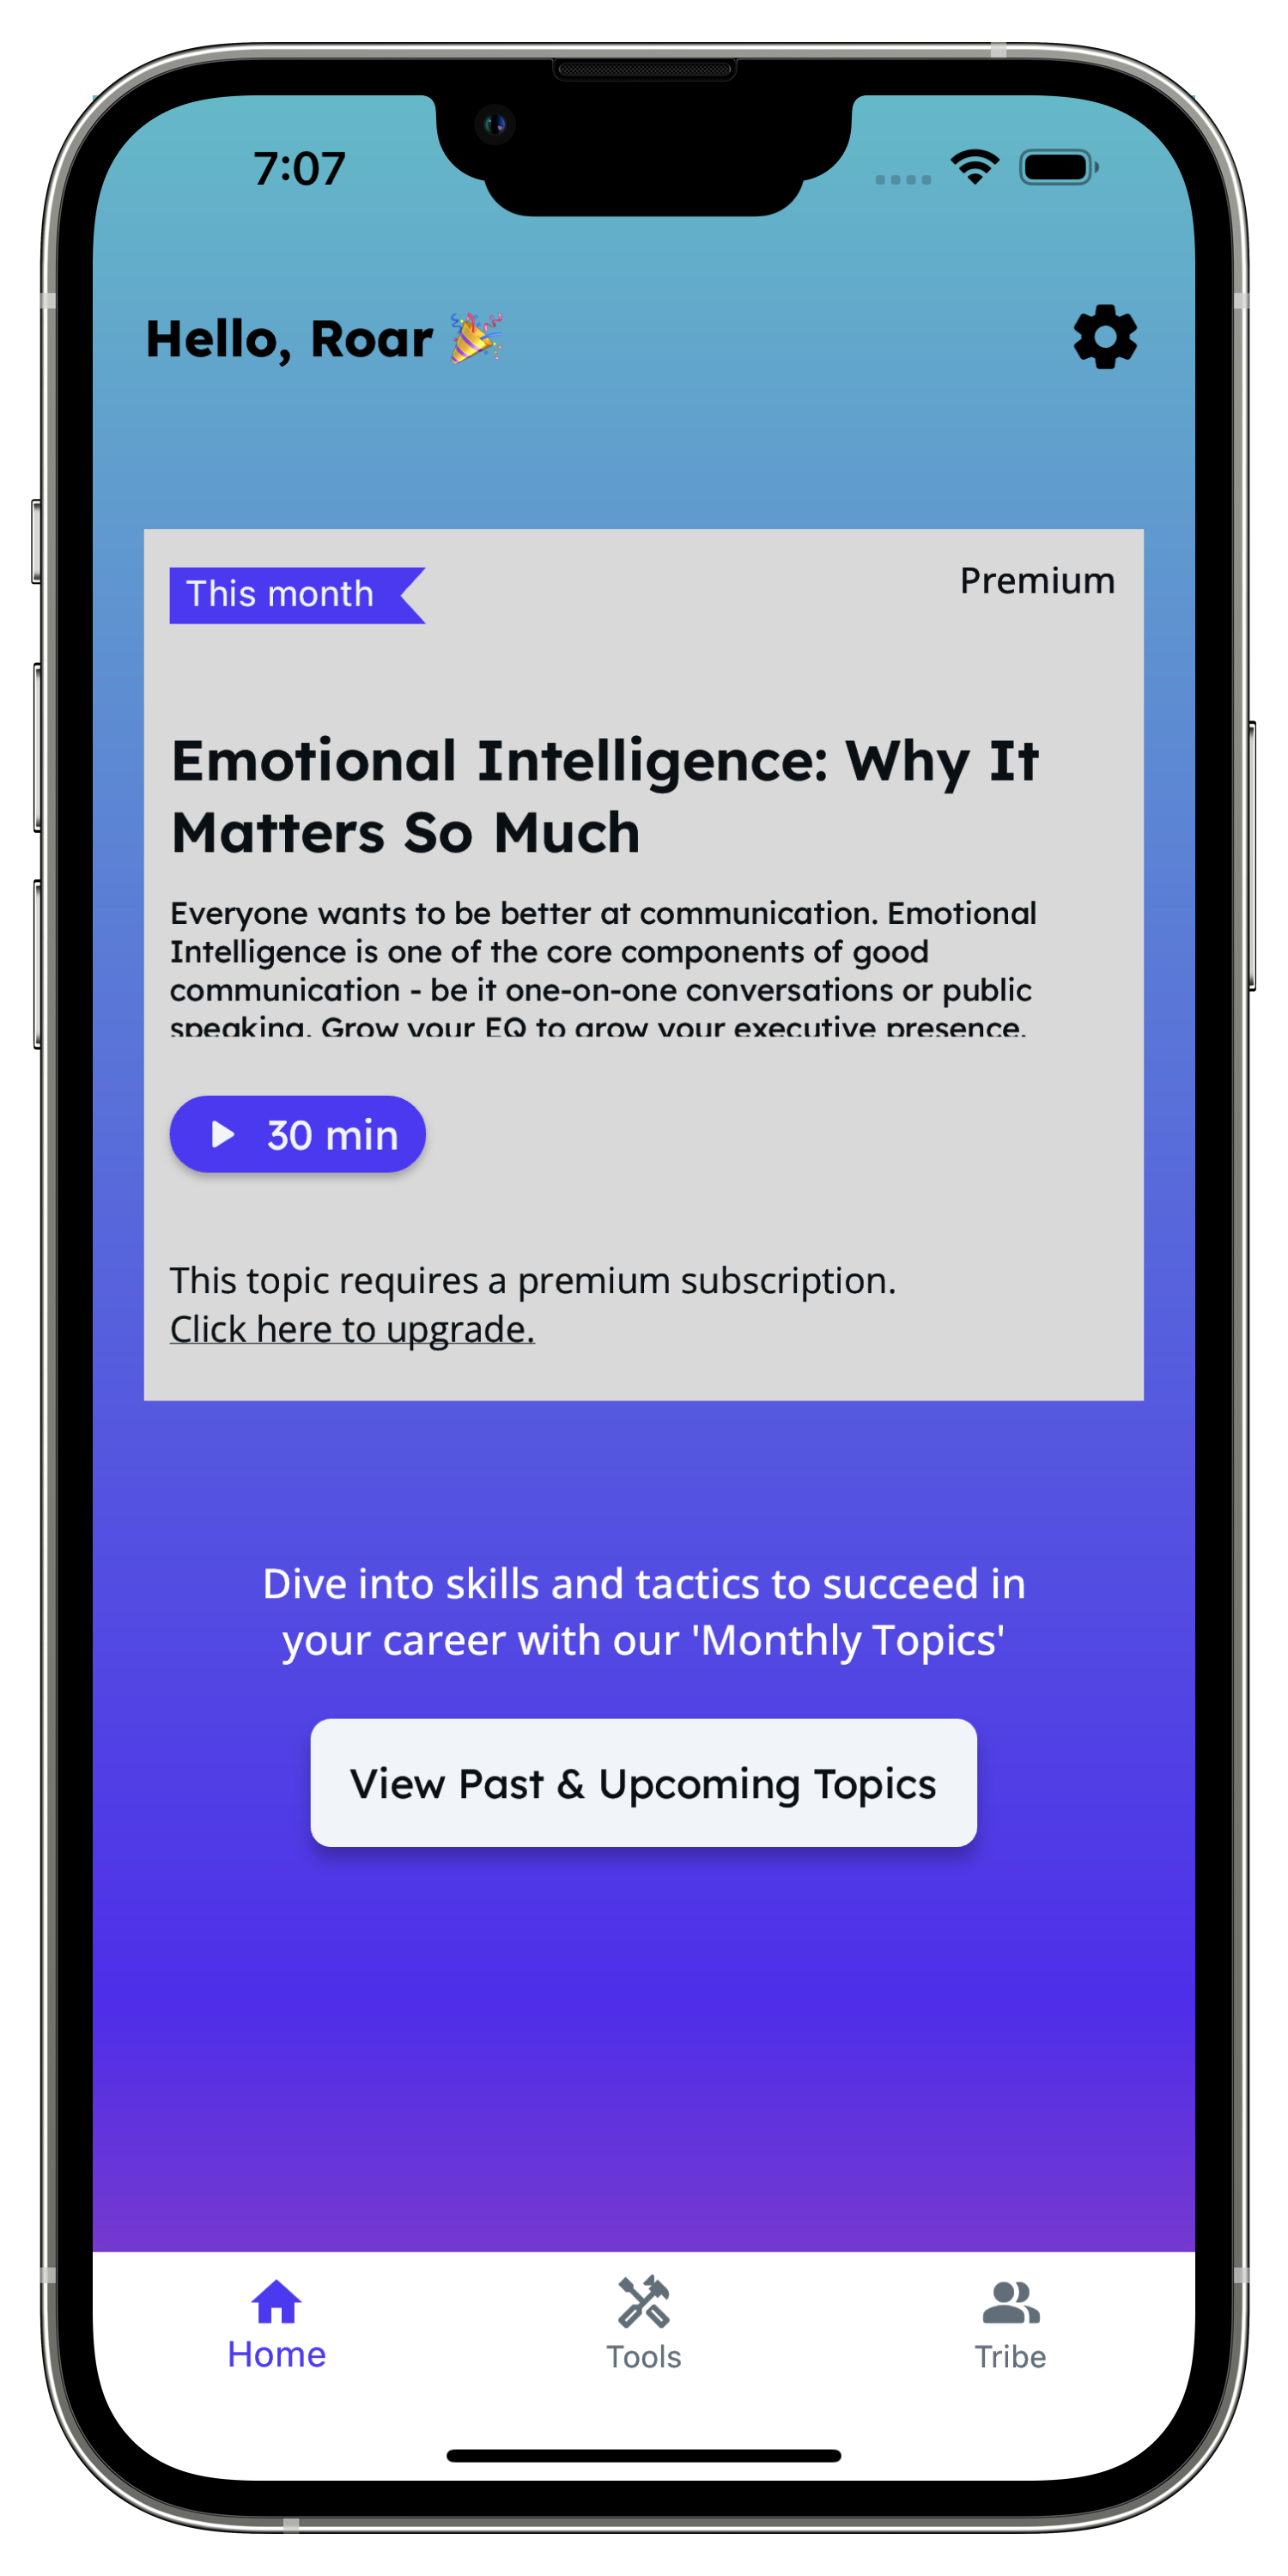 phone image showing the home screen of the roar app, which shows monthly content on emotional intelligence